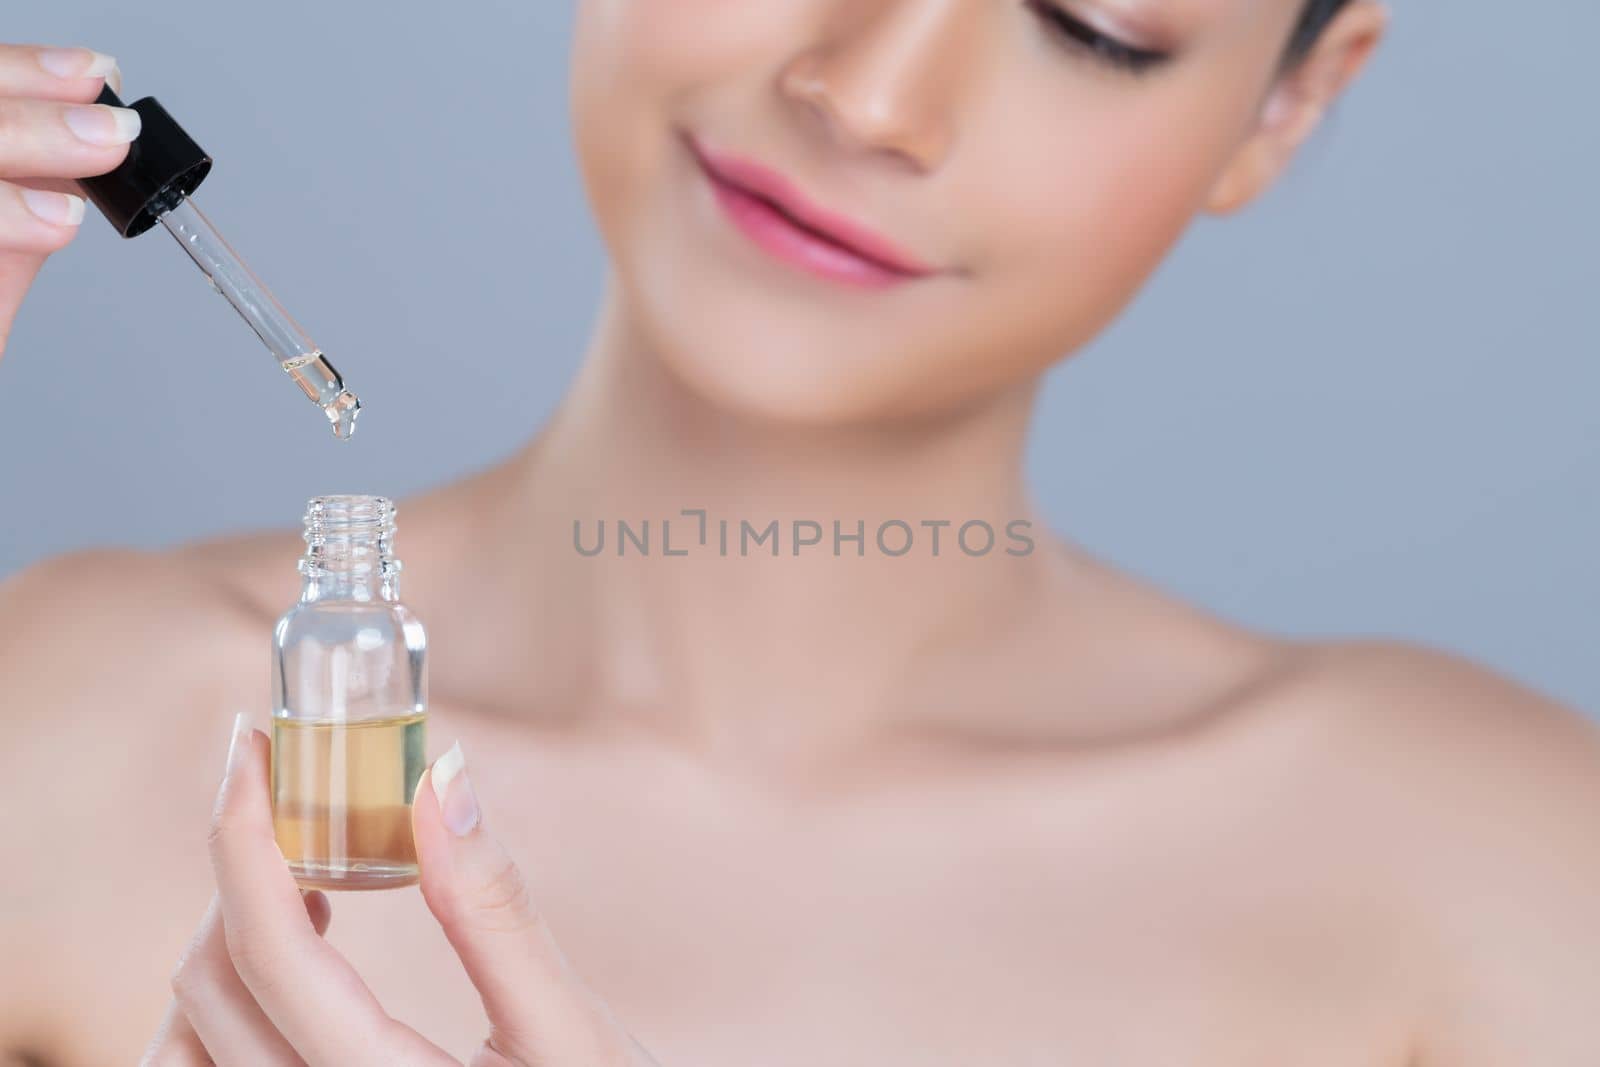 Focus cannabis extracted oil bottle with dropper lid holding by blurred glamorous beautiful asian woman with perfect clean skin and soft smooth makeup in isolated background.